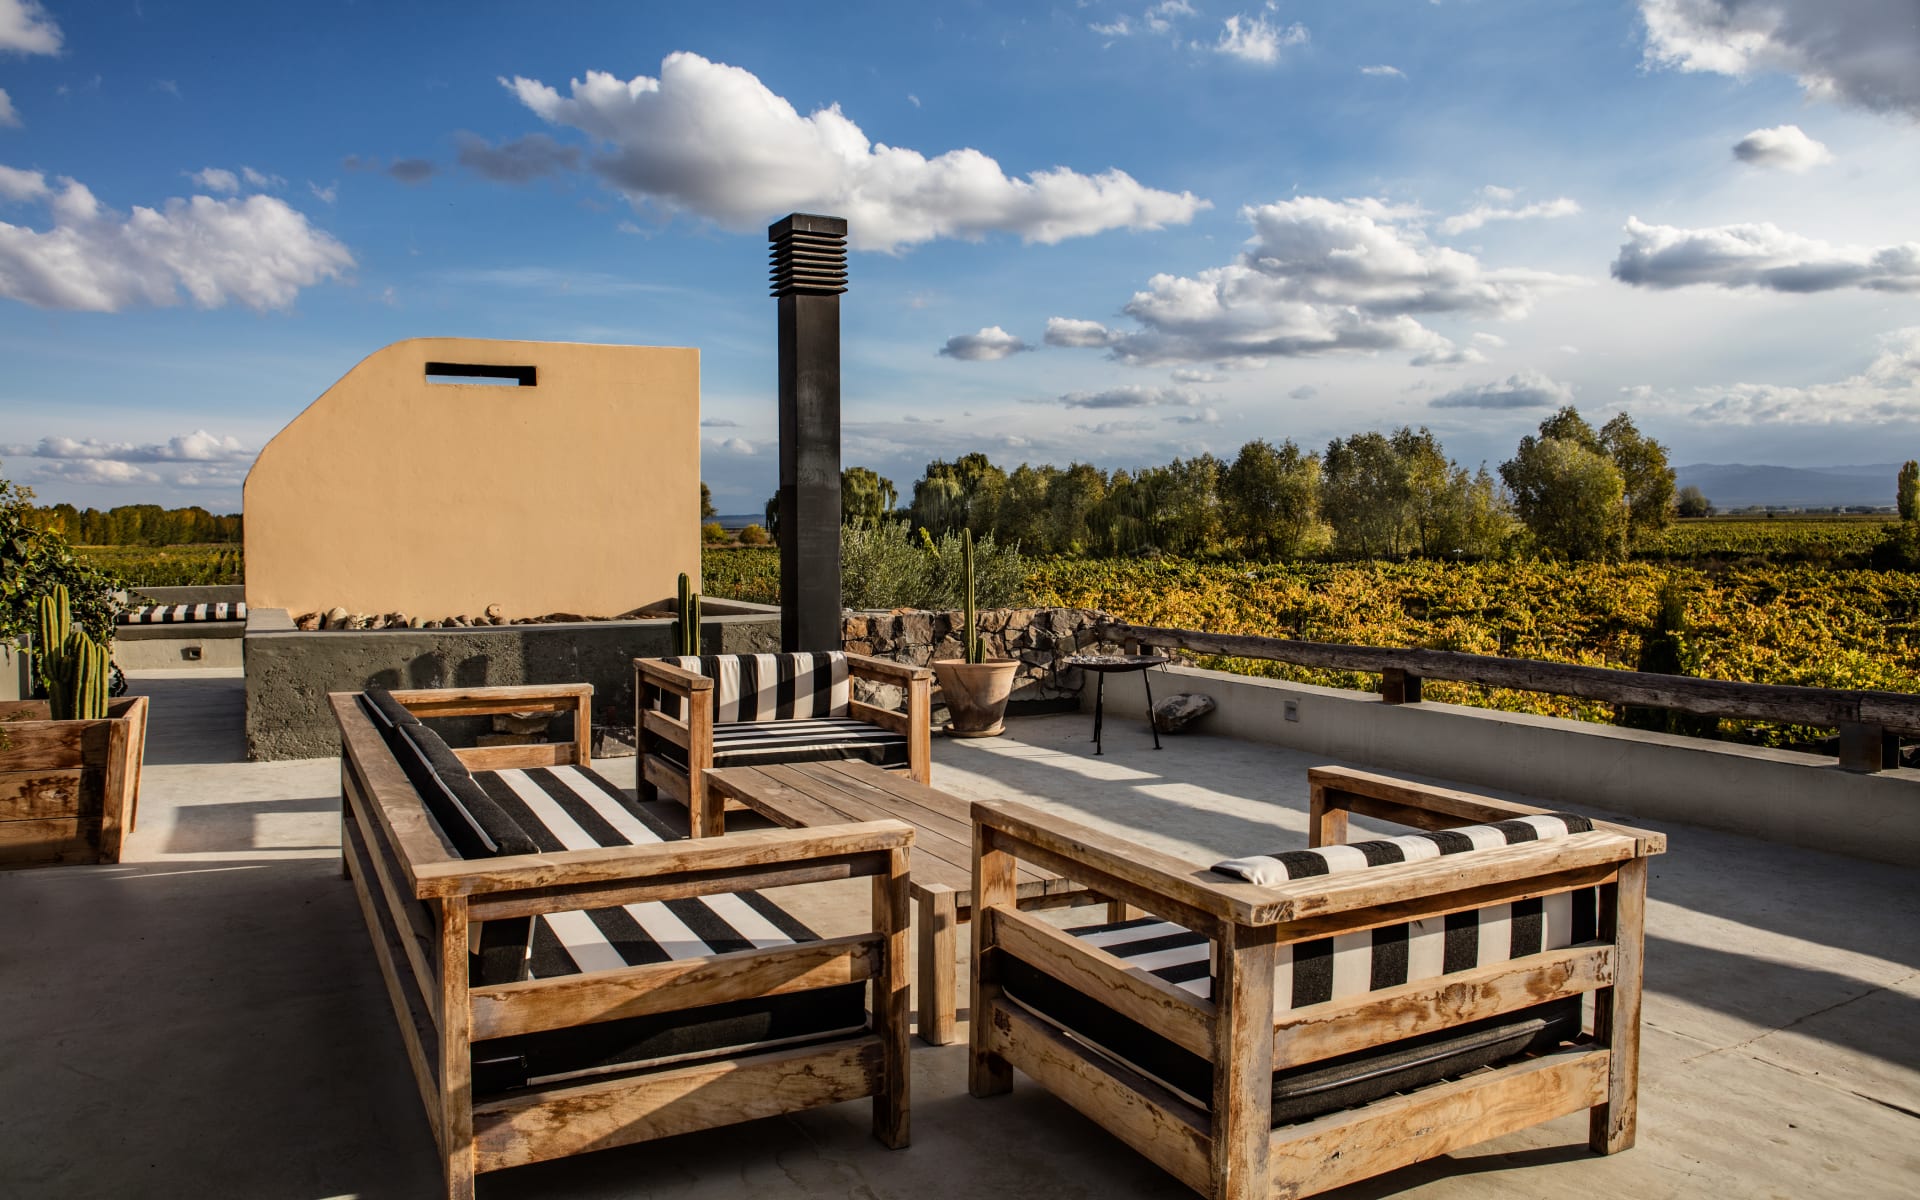 On the roof of Canvas Wine Lodge is a seating area with large wooden chairs, black and white pillows, and an outdoor cooking area. 